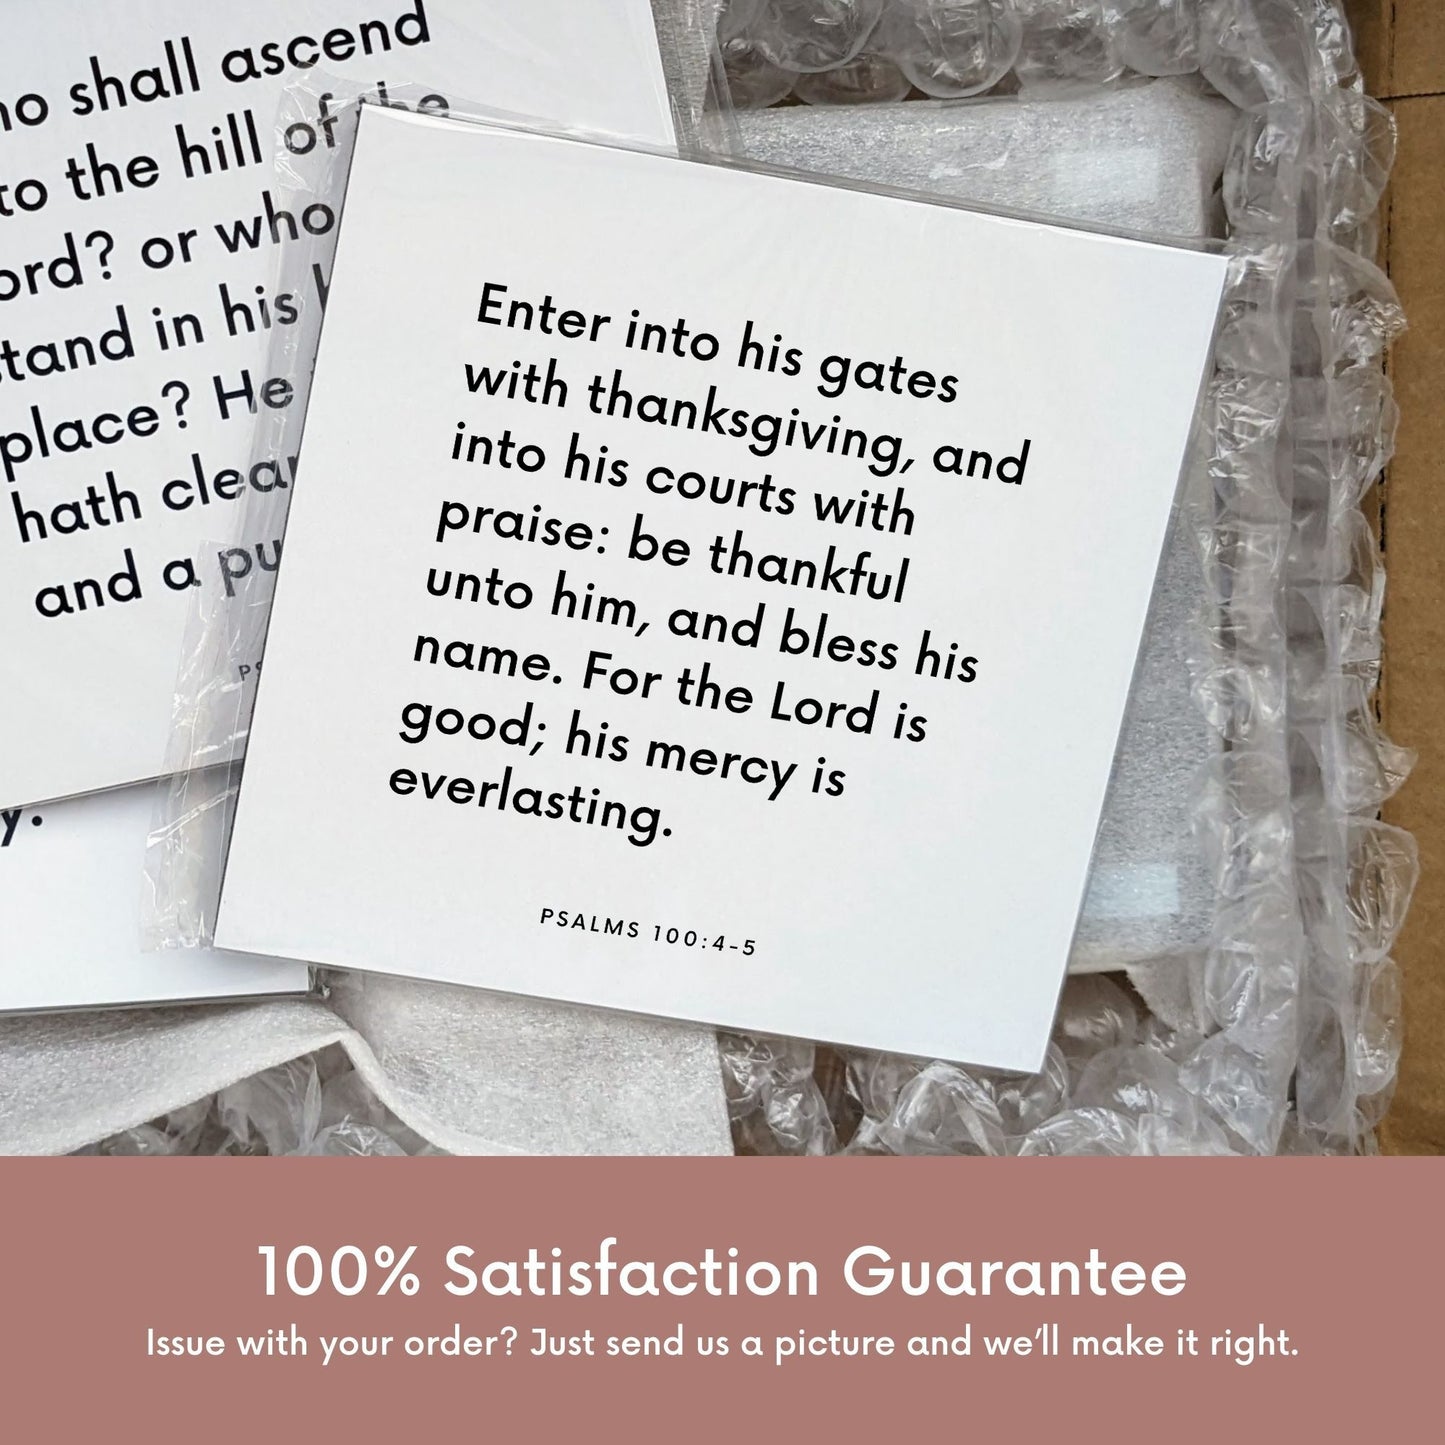 Shipping materials for scripture tile of Psalms 100:4-5 - "Be thankful unto him and bless his name, for the Lord is good"